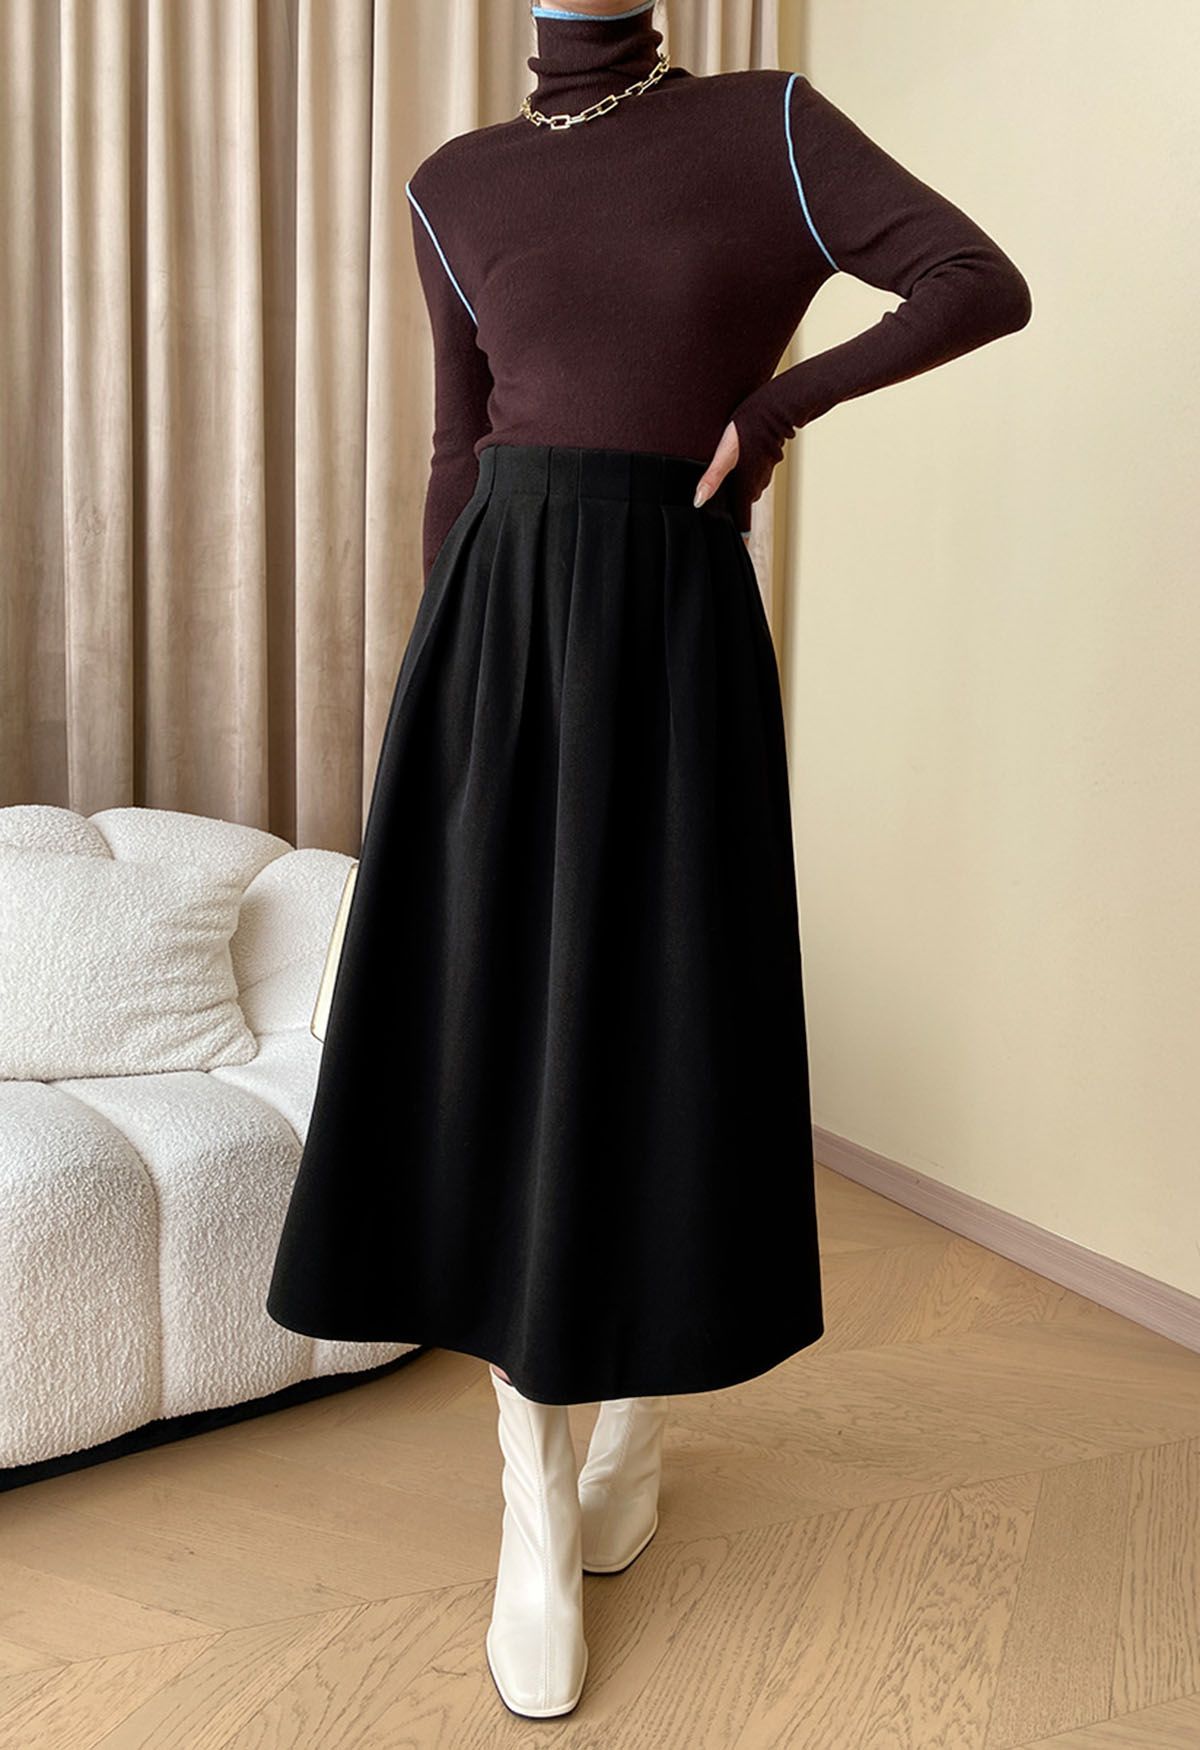 Solid Color Wool-Blend Pleated Midi Skirt in Black - Retro, Indie and ...